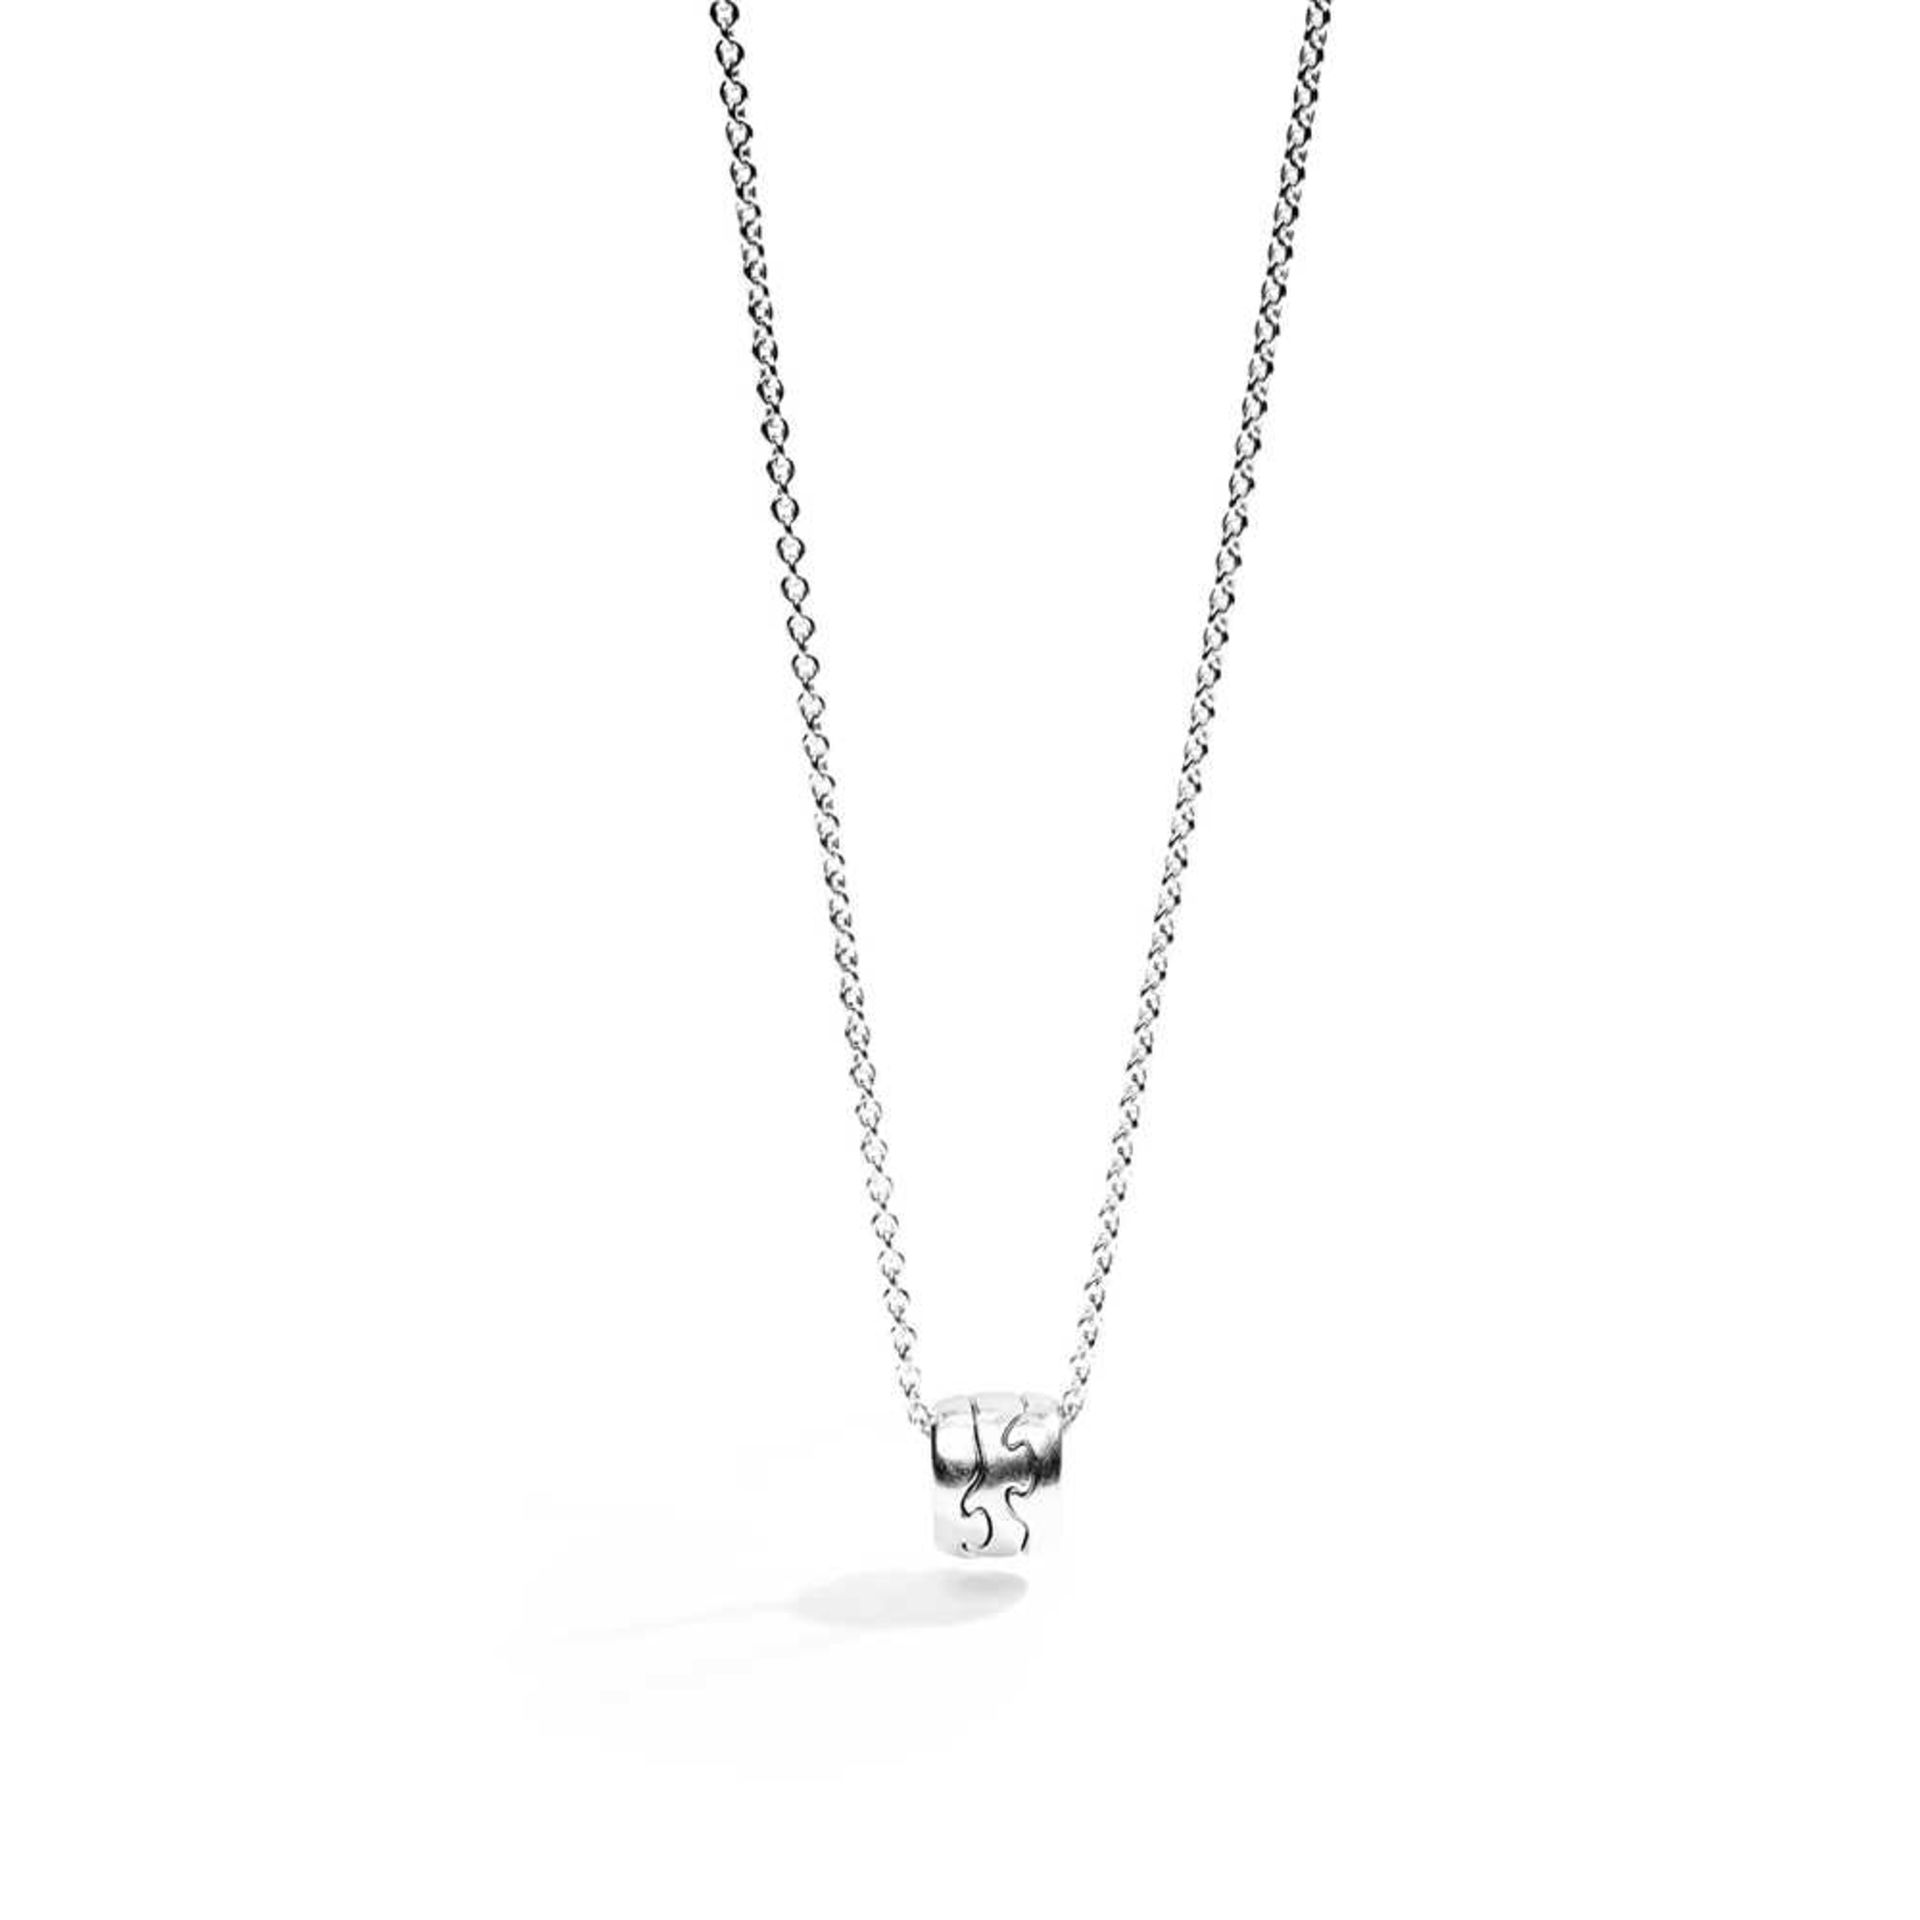 A 'Fusion' ring and pendant necklace, by Georg Jensen - Image 3 of 3